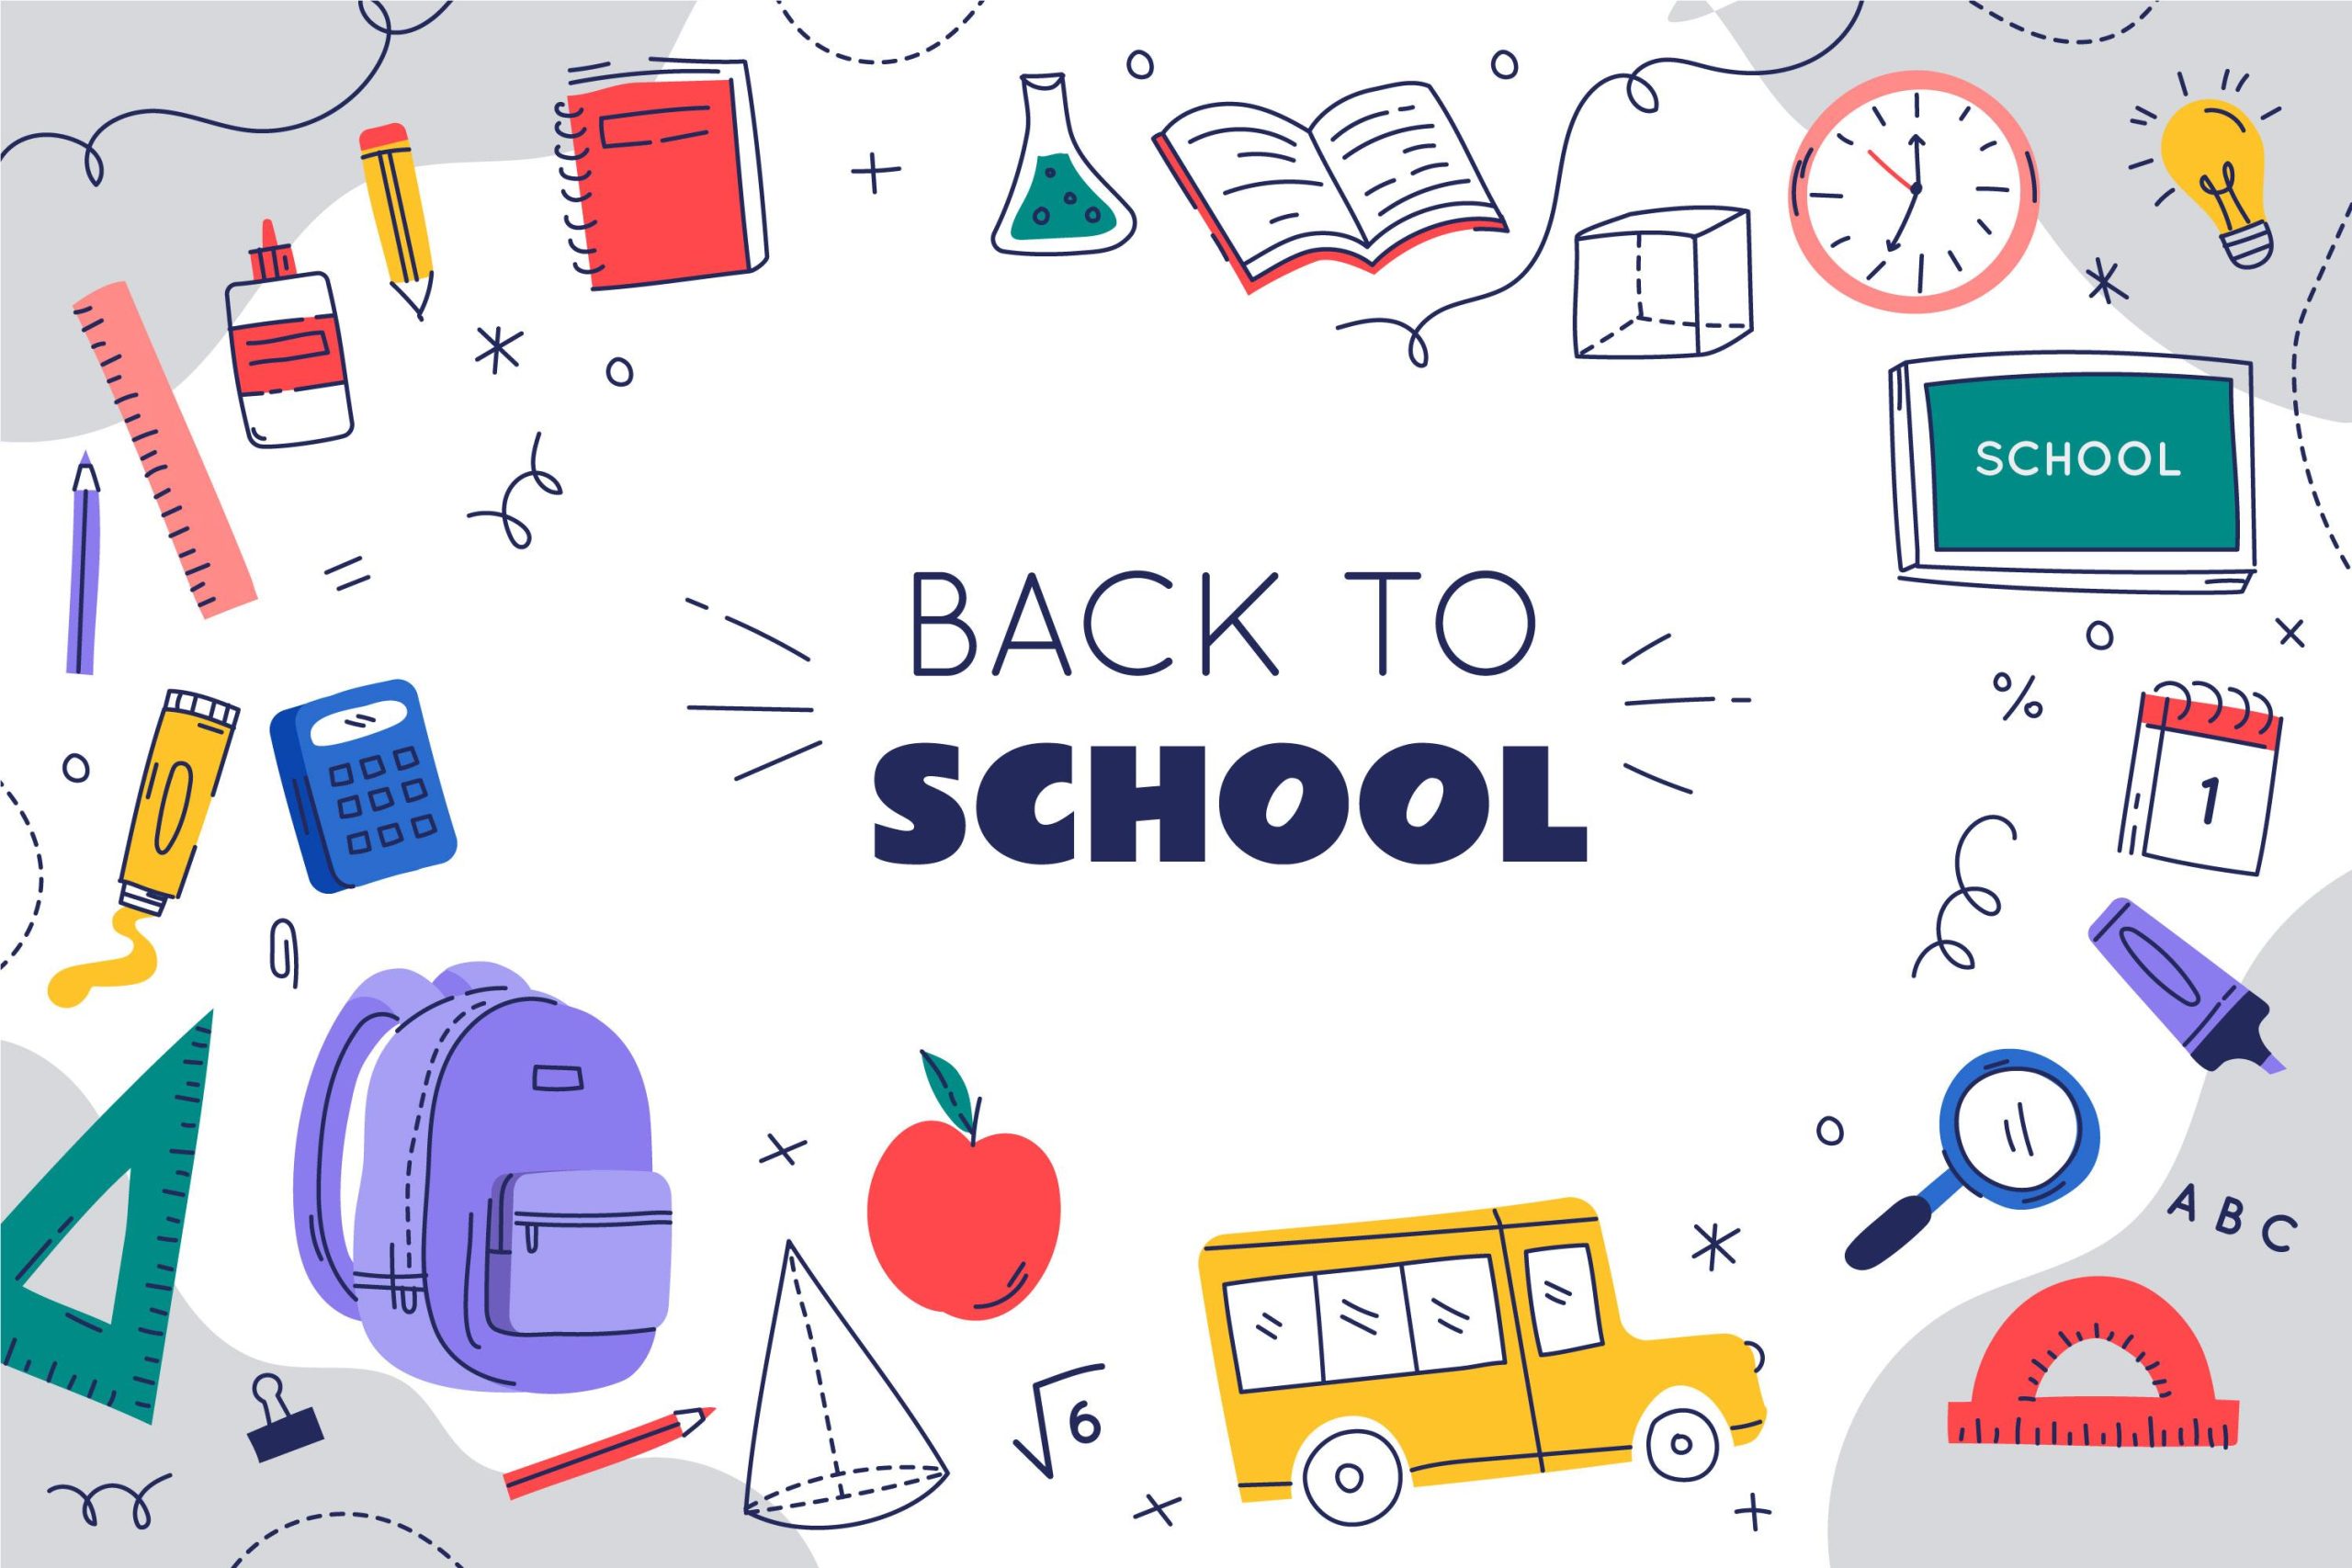 Back to school: Tips for the new Academic Year